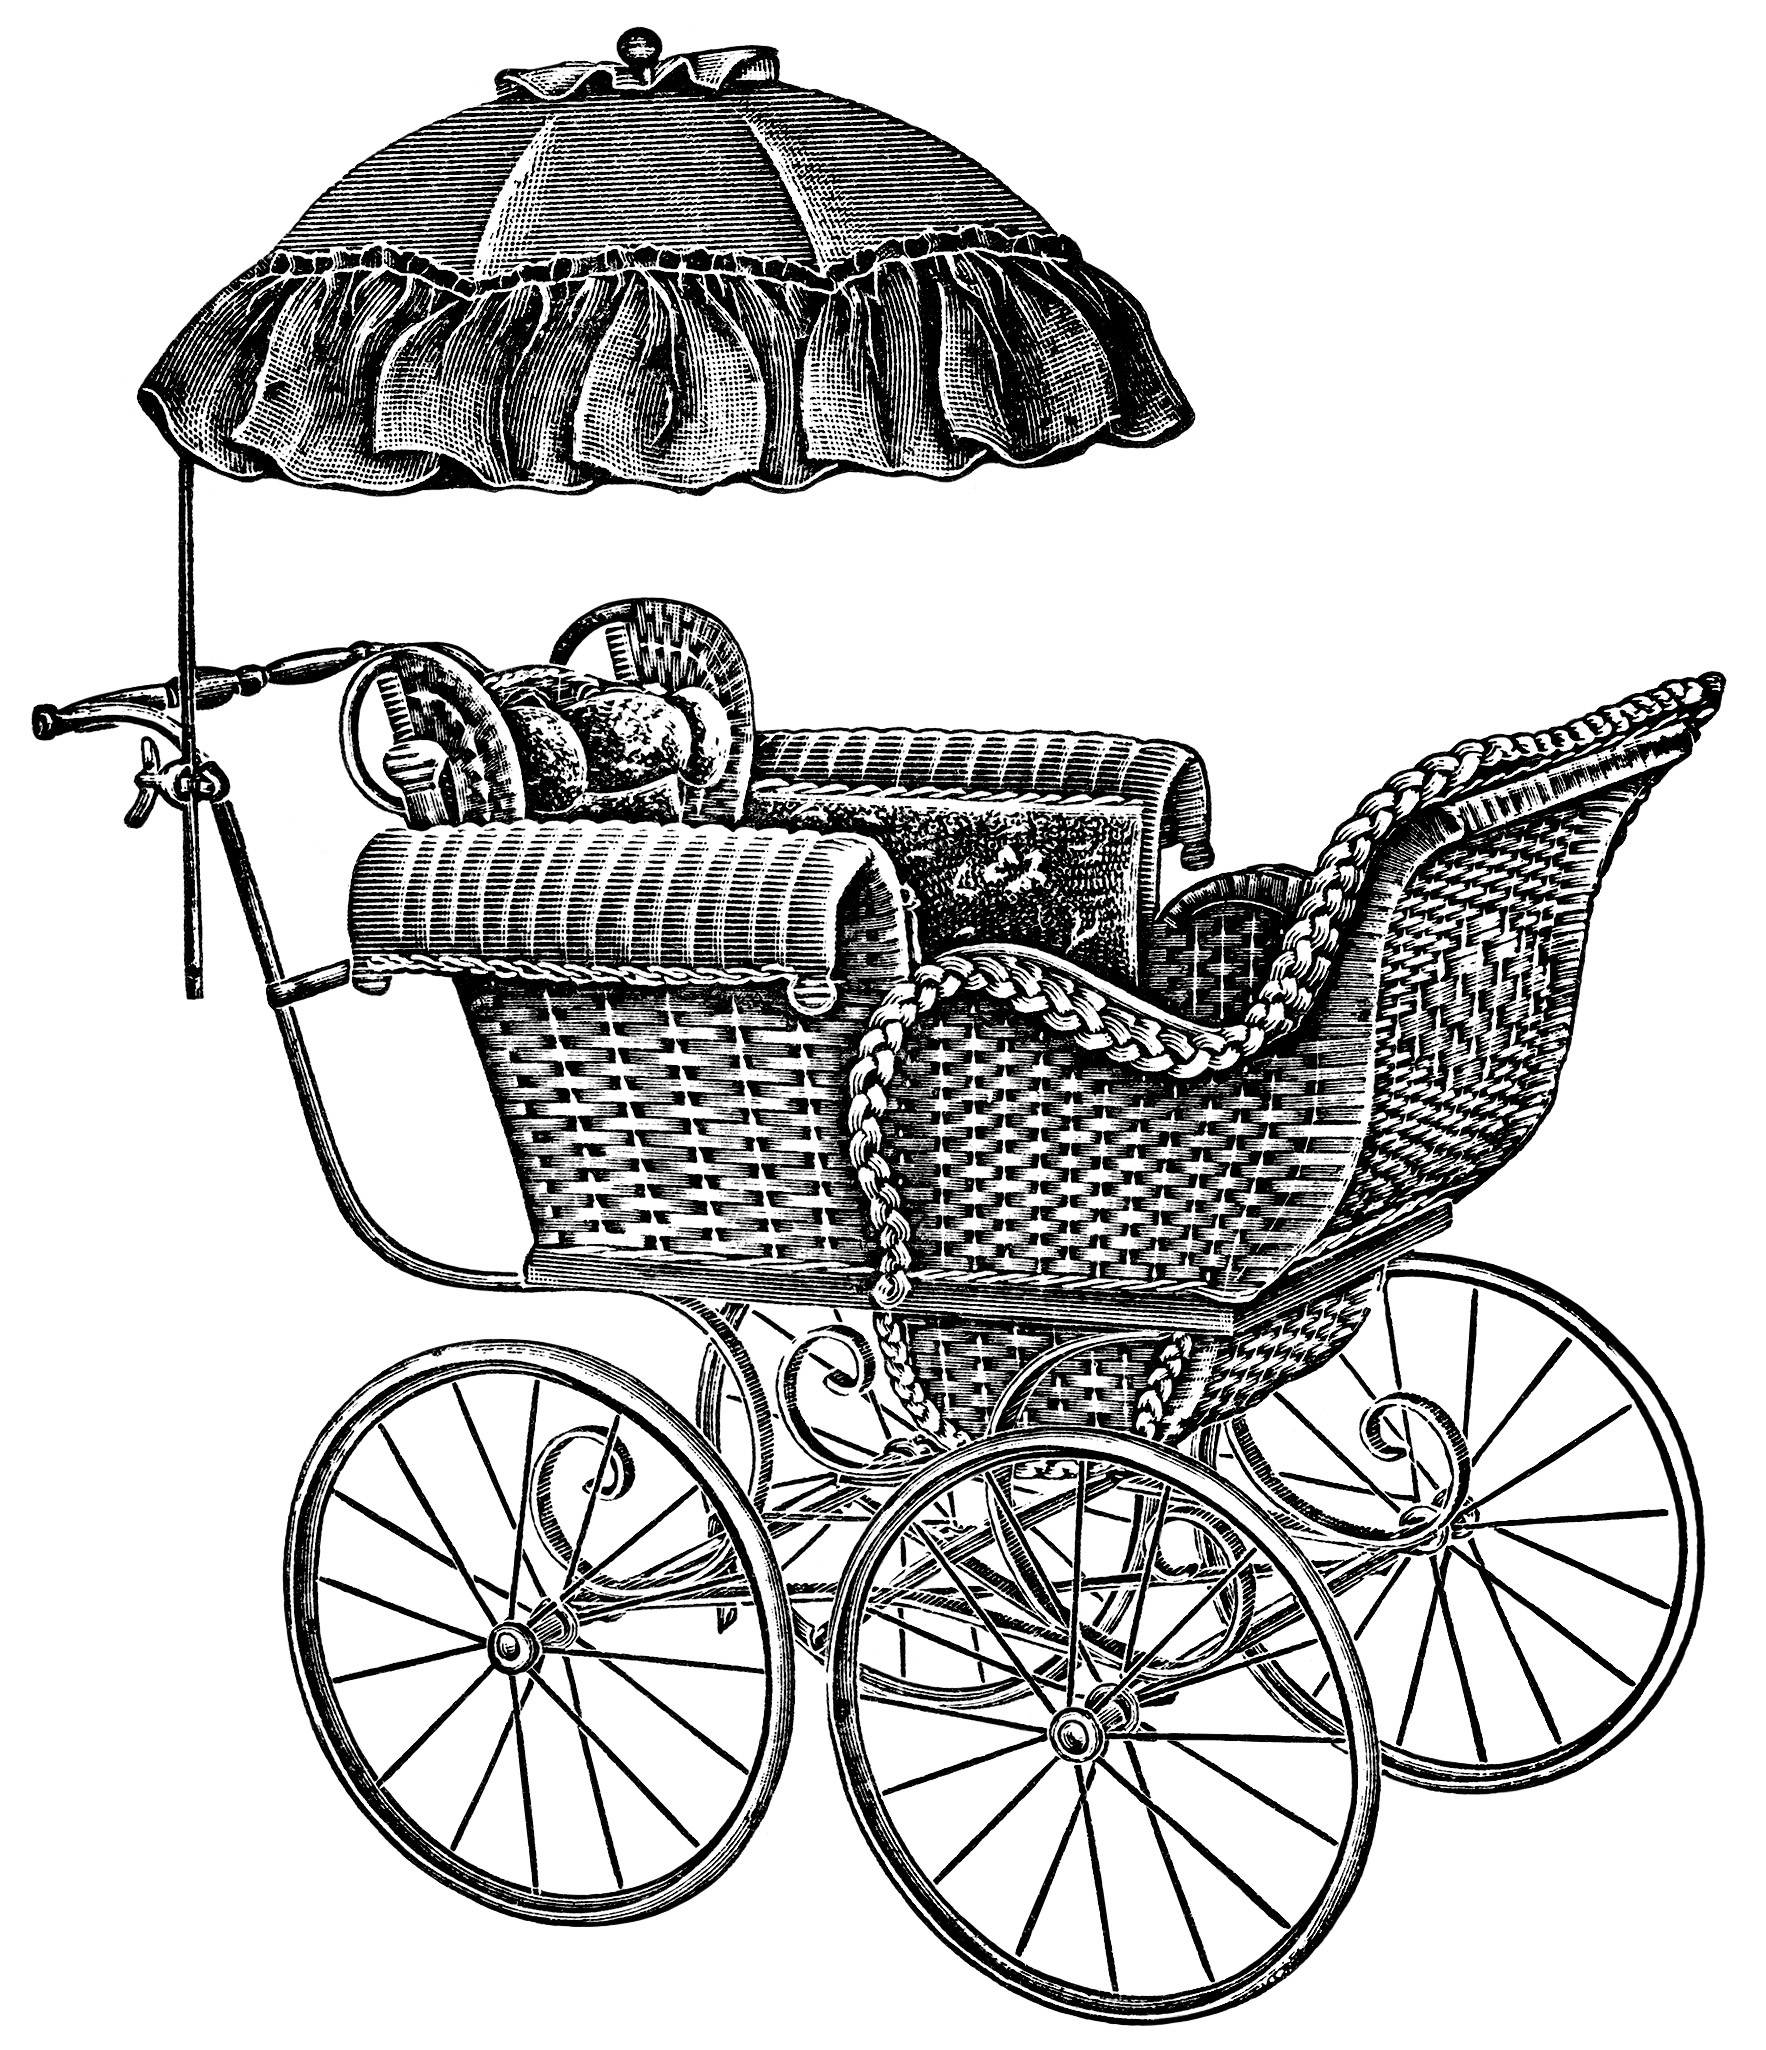 old catalogue page, vintage baby clip art, antique baby carriage illustration, free black and white clipart, pram carriage graphic, parasol covered baby buggy